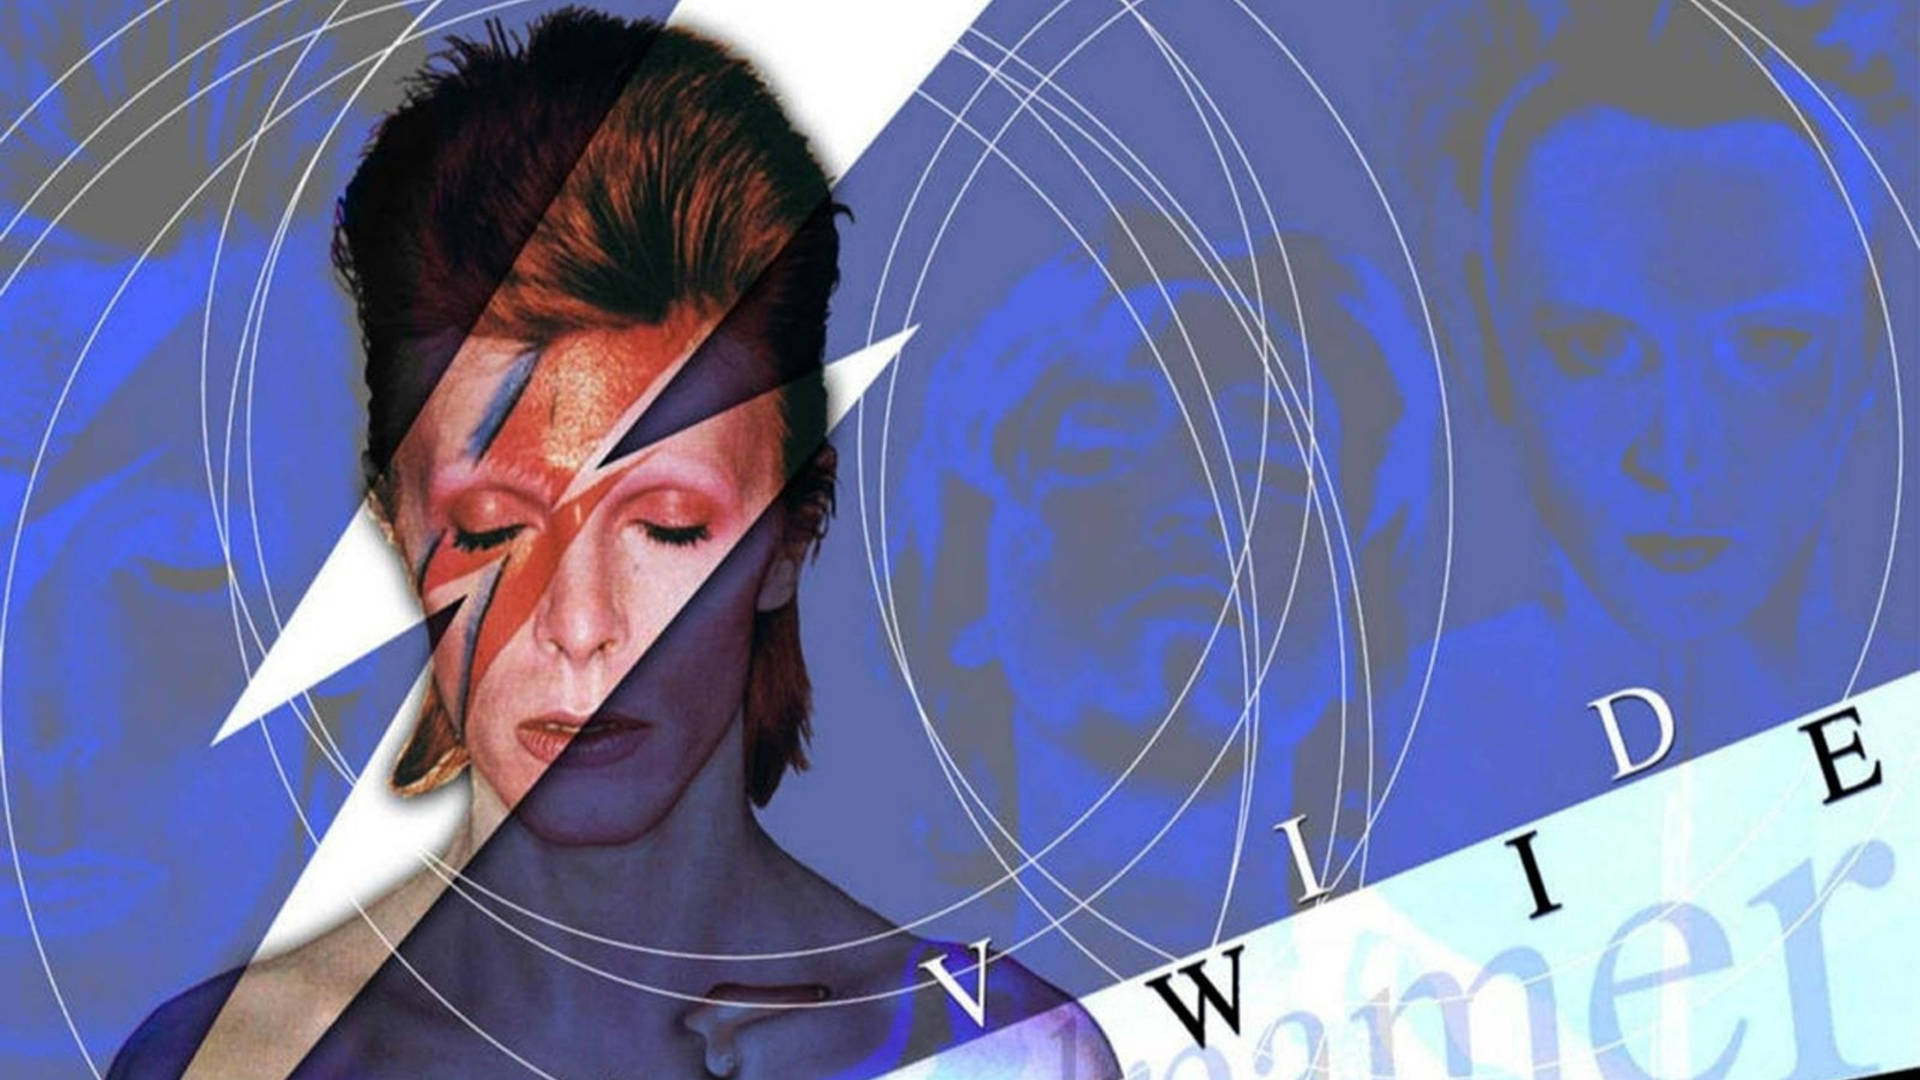 David Bowie 3840X2160 Wallpaper and Background Image